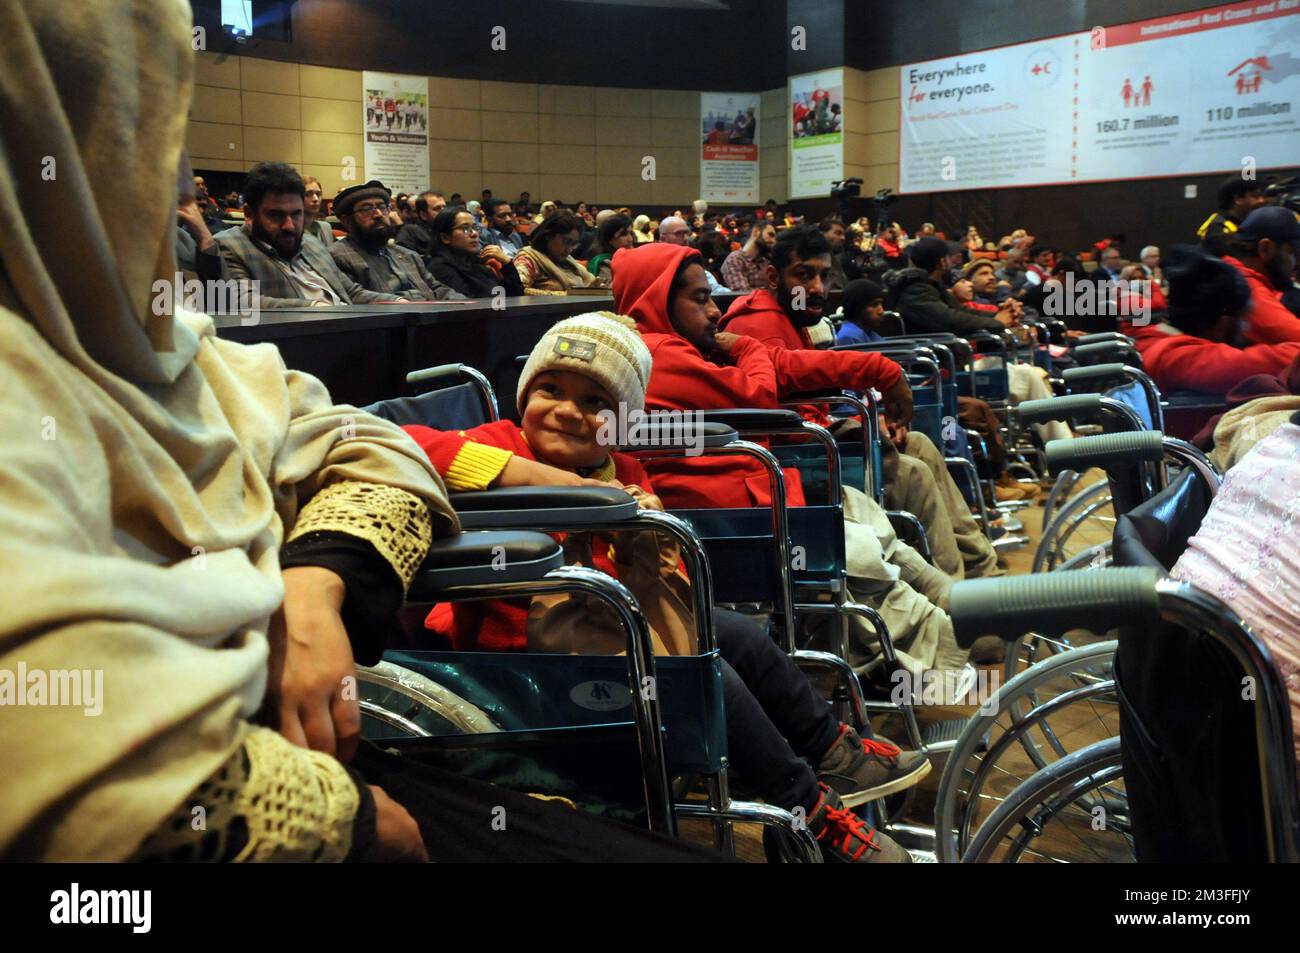 ISLAMABAD, PAKISTAN 'International Day of Persons with Disabilities' was observed around the world today, which aims to highlight the problems faced b Stock Photo